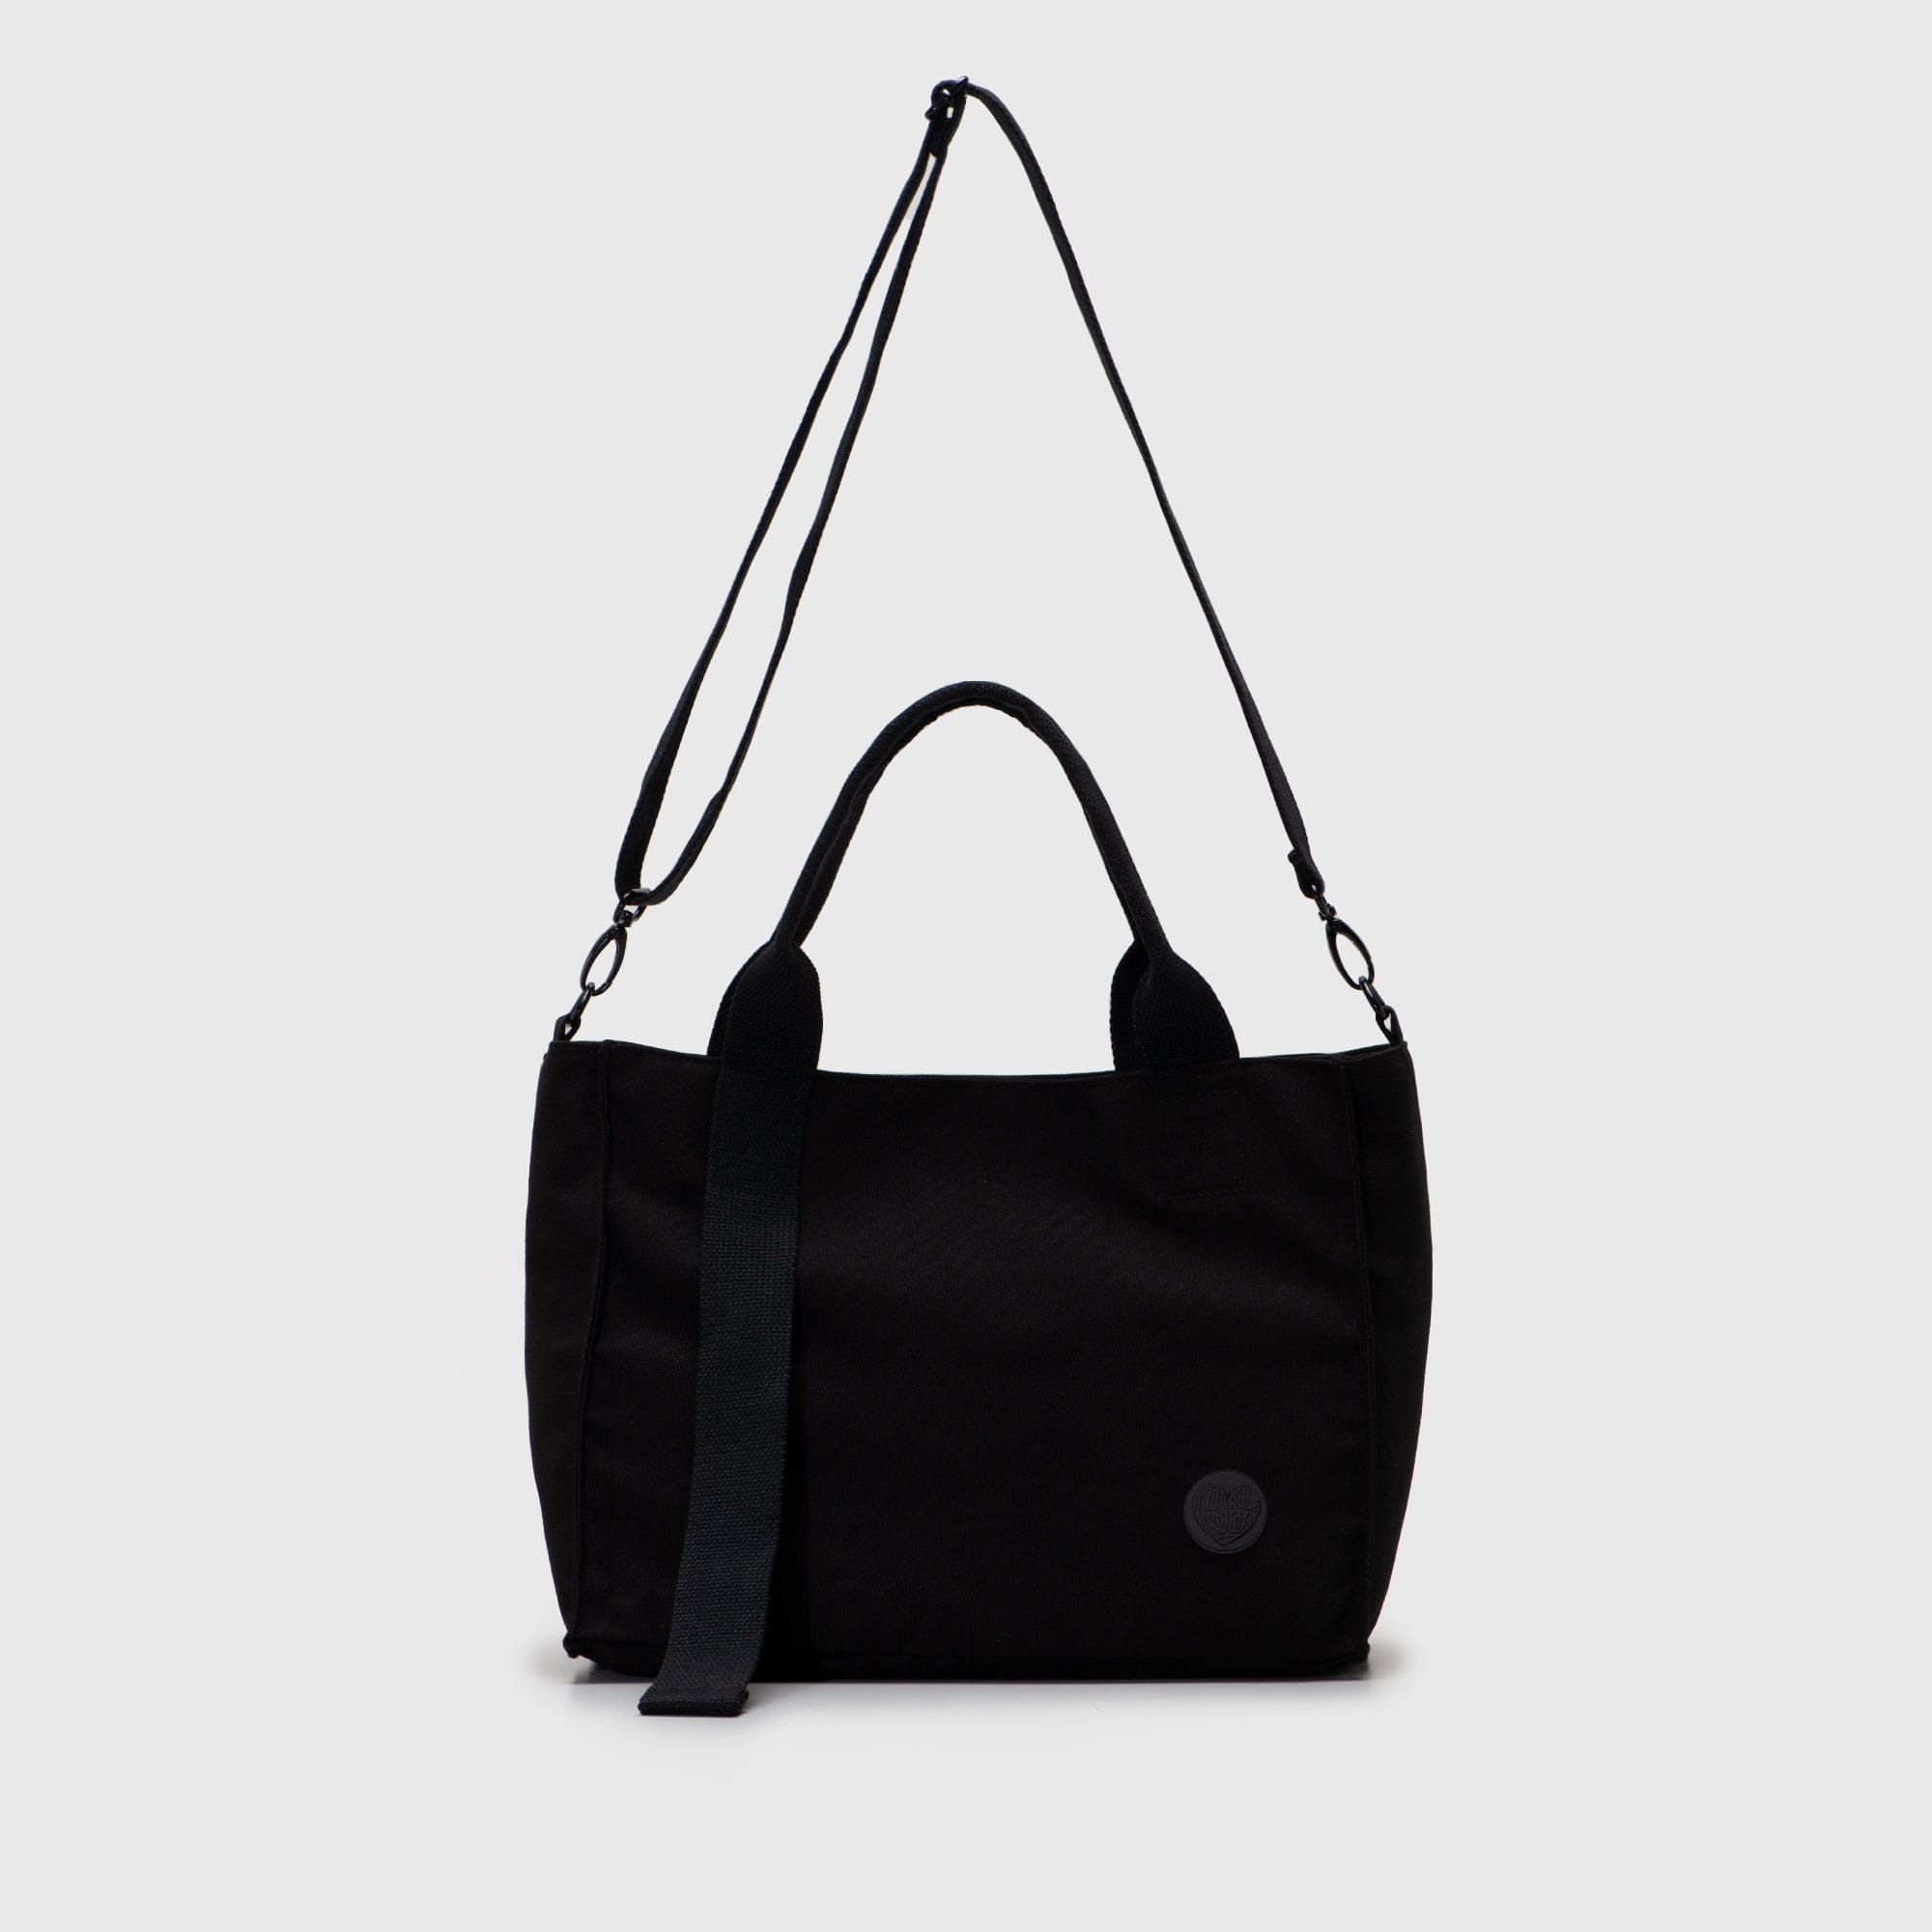 Adorable Projects Official Tote Bag Andarielle Tote Bag Black